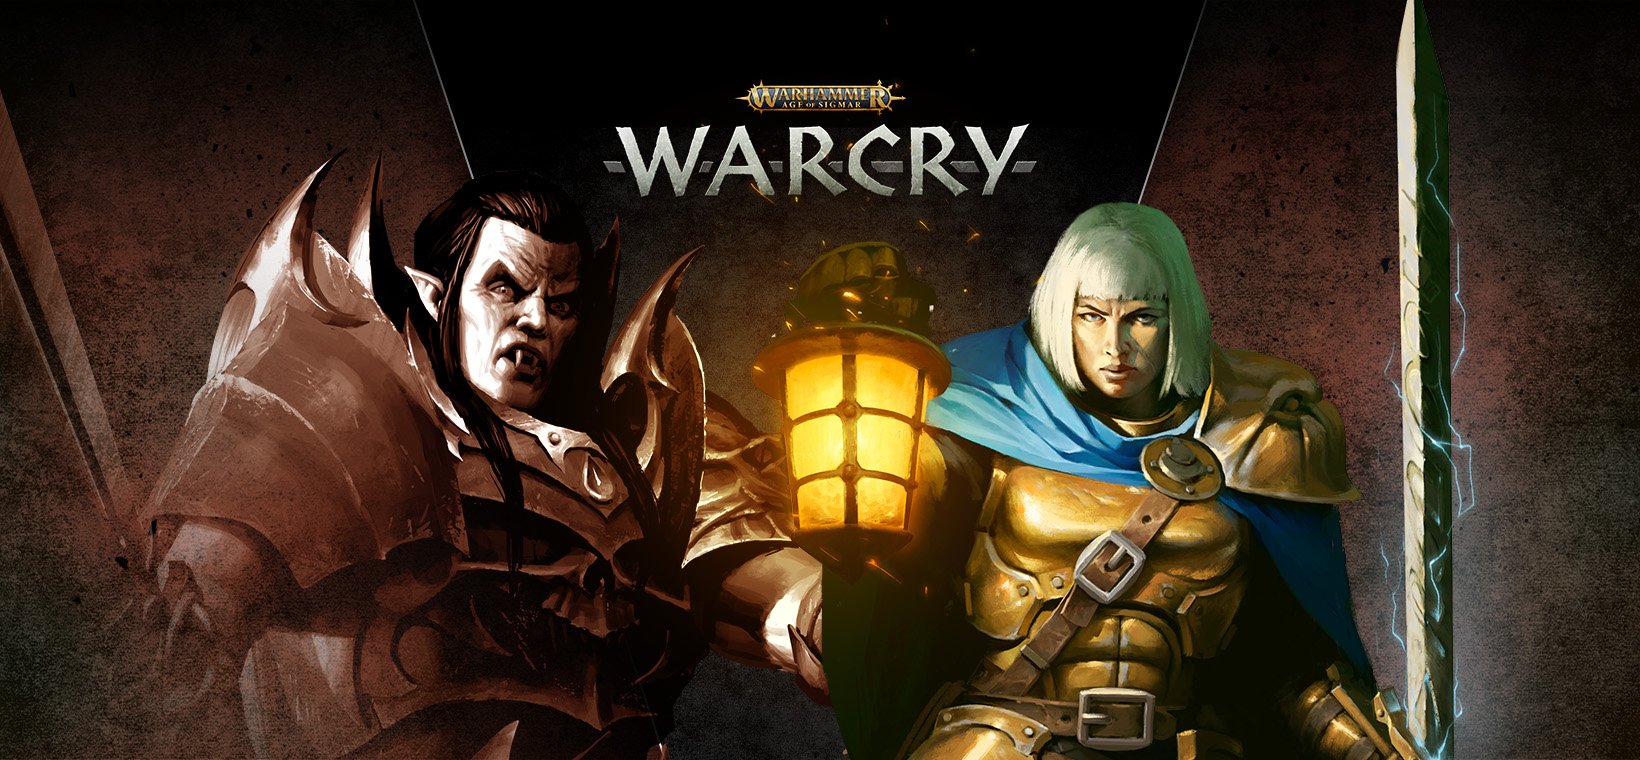 Warhammer Age of Sigmar: Warcry - There Will Be Games